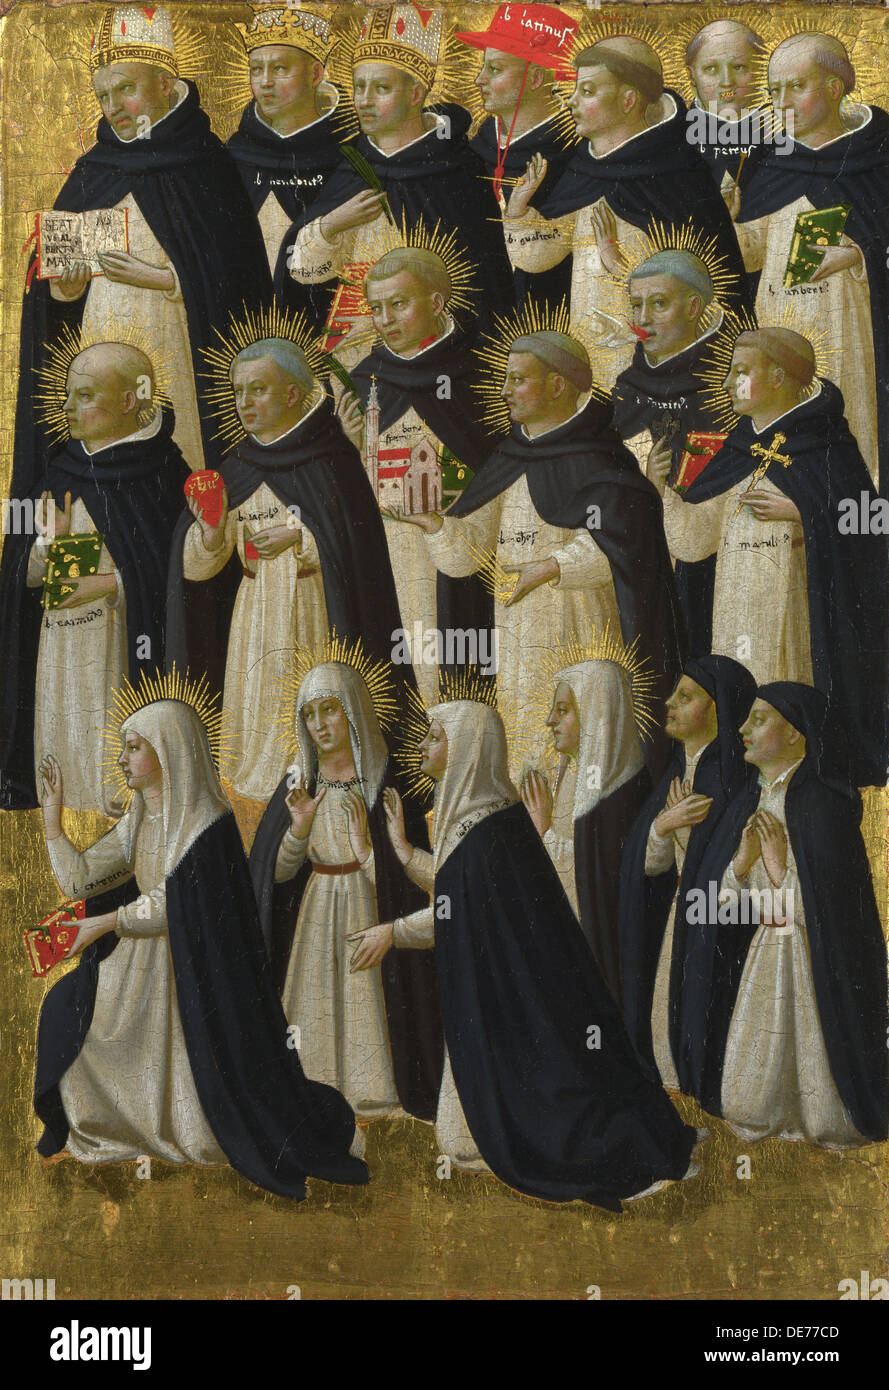 The Dominican Blessed (Panel from Fiesole San Domenico Altarpiece), c. 1423-1424. Artist: Angelico, Fra Giovanni, da Fiesole (ca. 1400-1455) Stock Photo